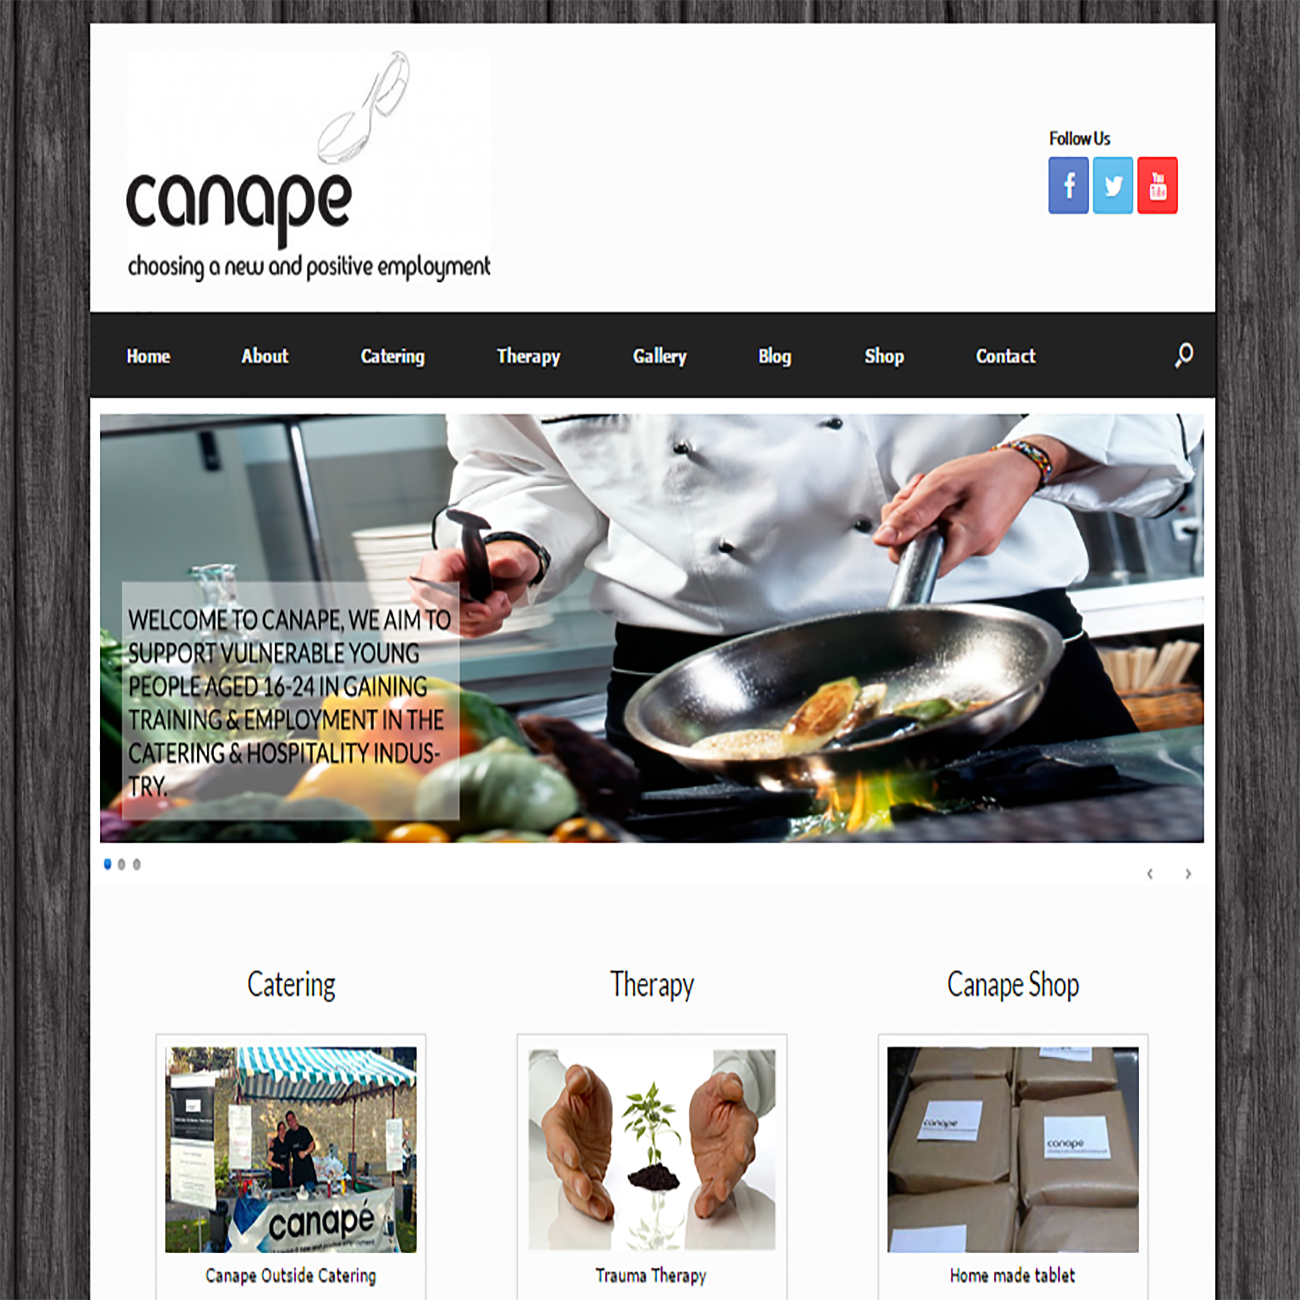 Canape - Choosing a new and positive employment website